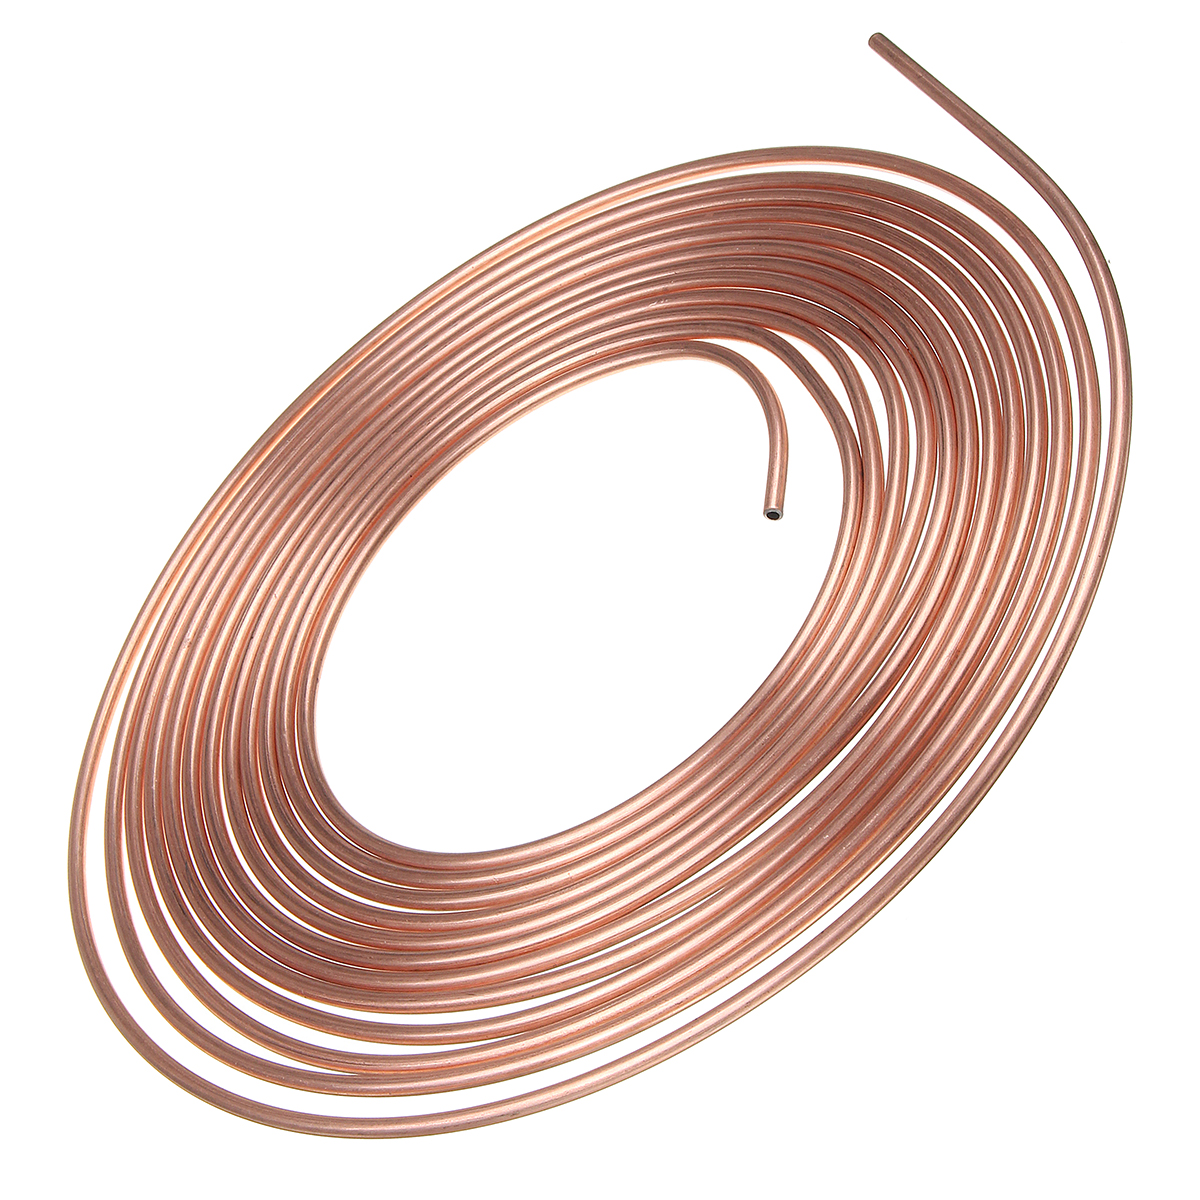 Roll-Copper-Steel-25-ft-316quot-Brake-Line-Pipe-Tubing-with-20-Pcs-Kit-Fittings-Brake-Female-Male-Nu-1543212-4